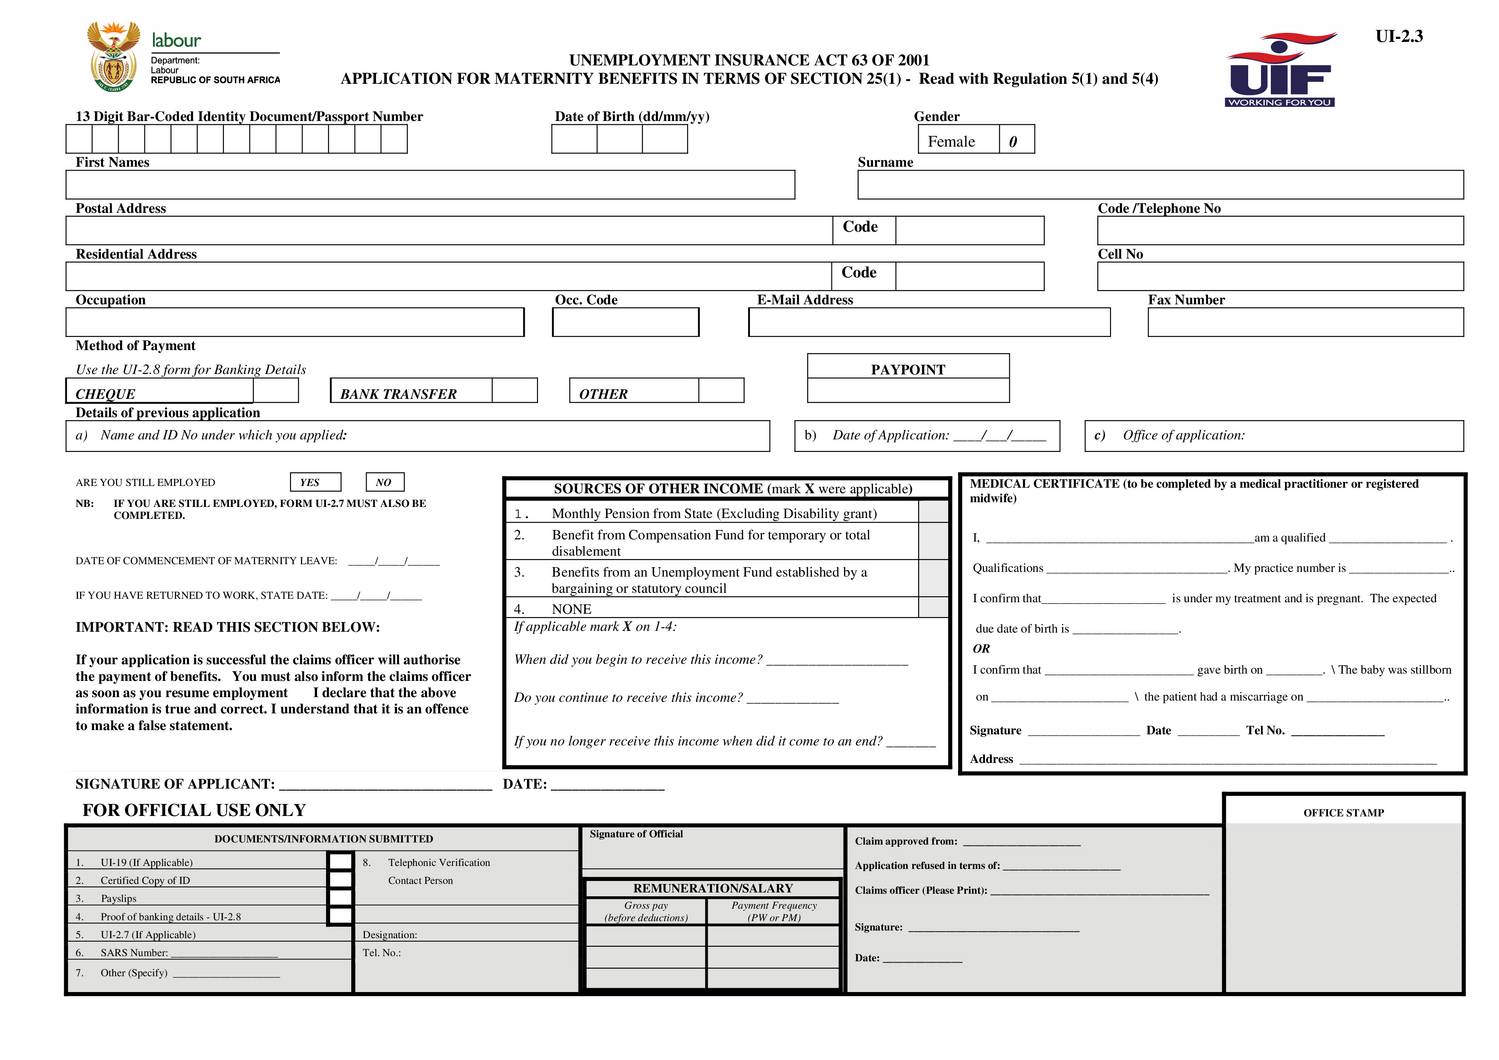 Preview document. Related forms